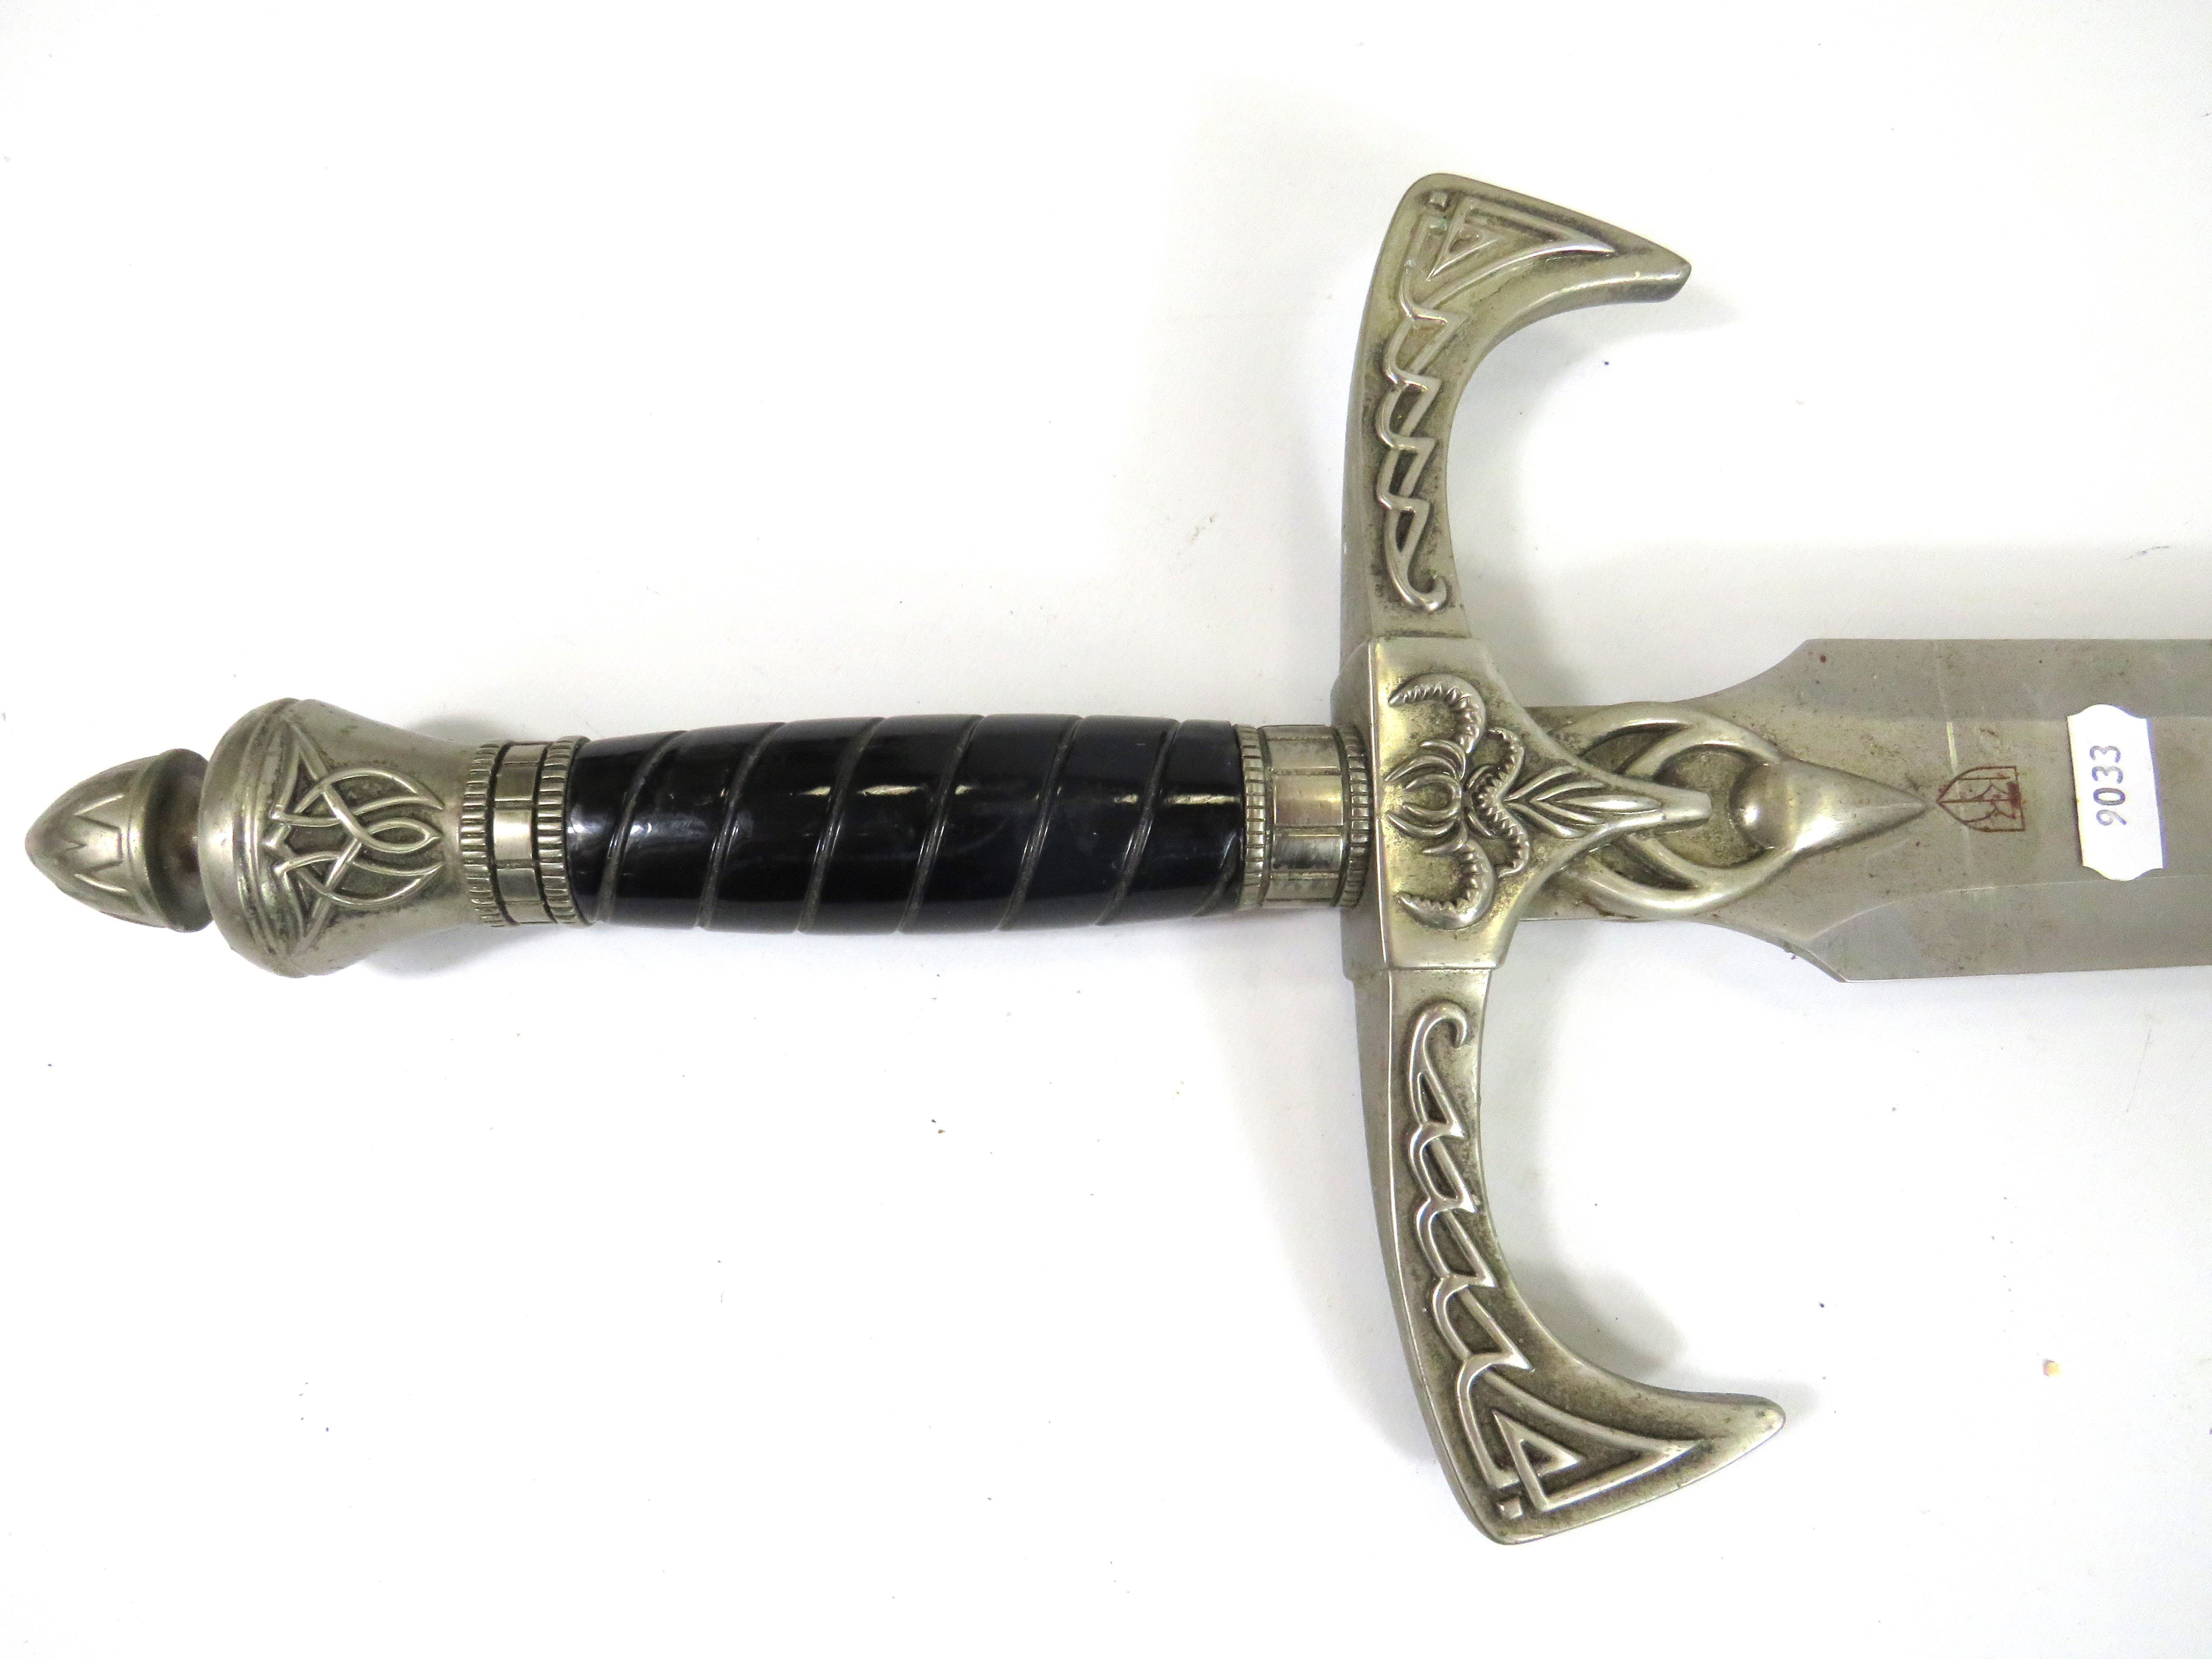 Large Film Replica  Sword made from Stainless steel by United Cutlery.  Measures approx 37 inches lo - Image 2 of 4